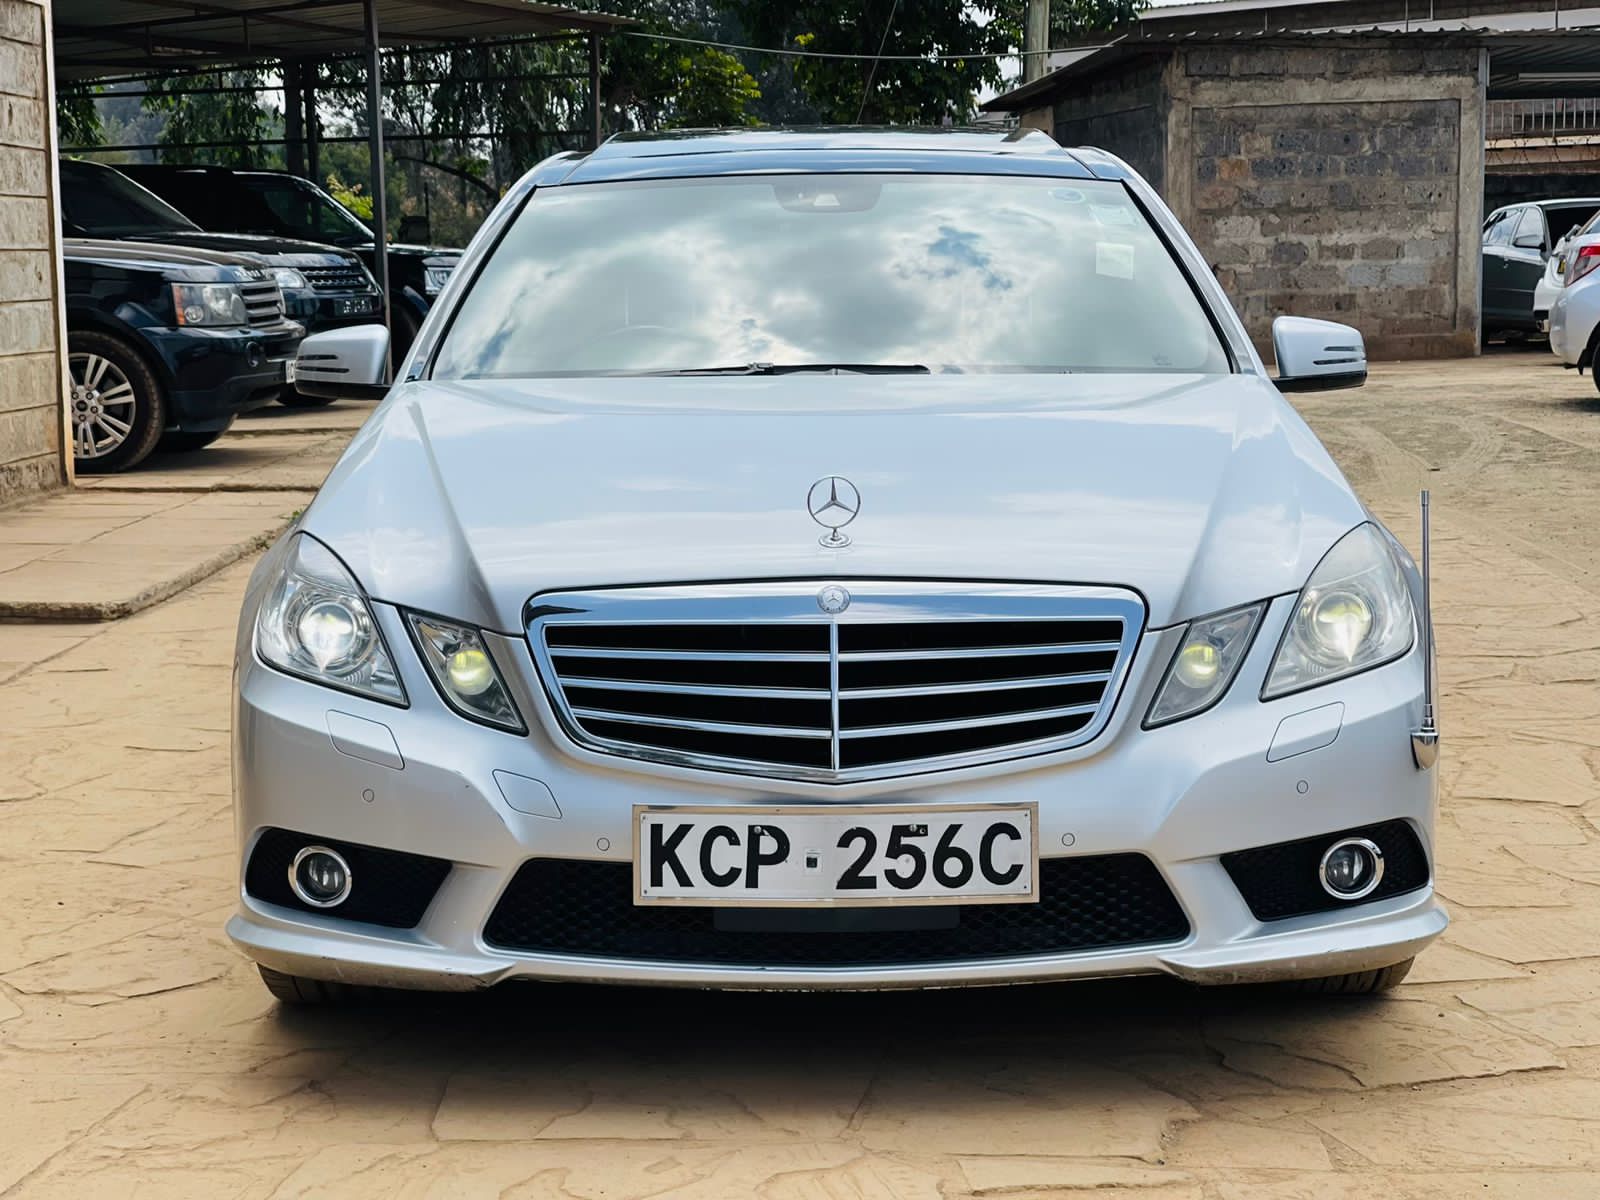 Mercedes Benz E250 CGI fully loaded as New Pay 30% 70% in 60 months Wow